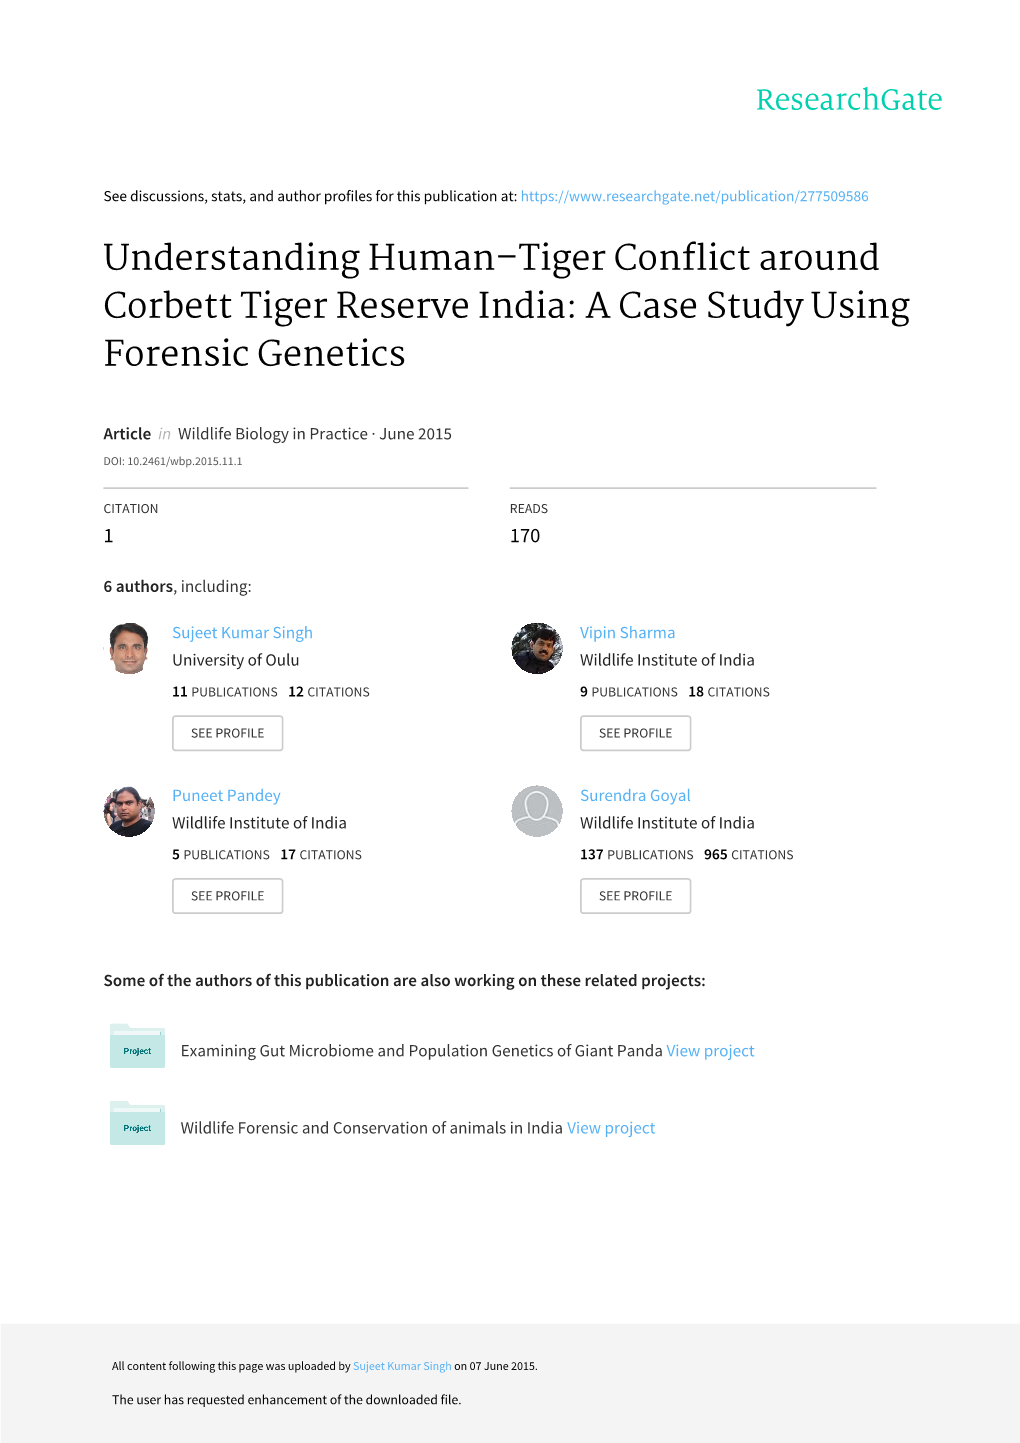 Understanding Human–Tiger Conflict Around Corbett Tiger Reserve India: a Case Study Using Forensic Genetics